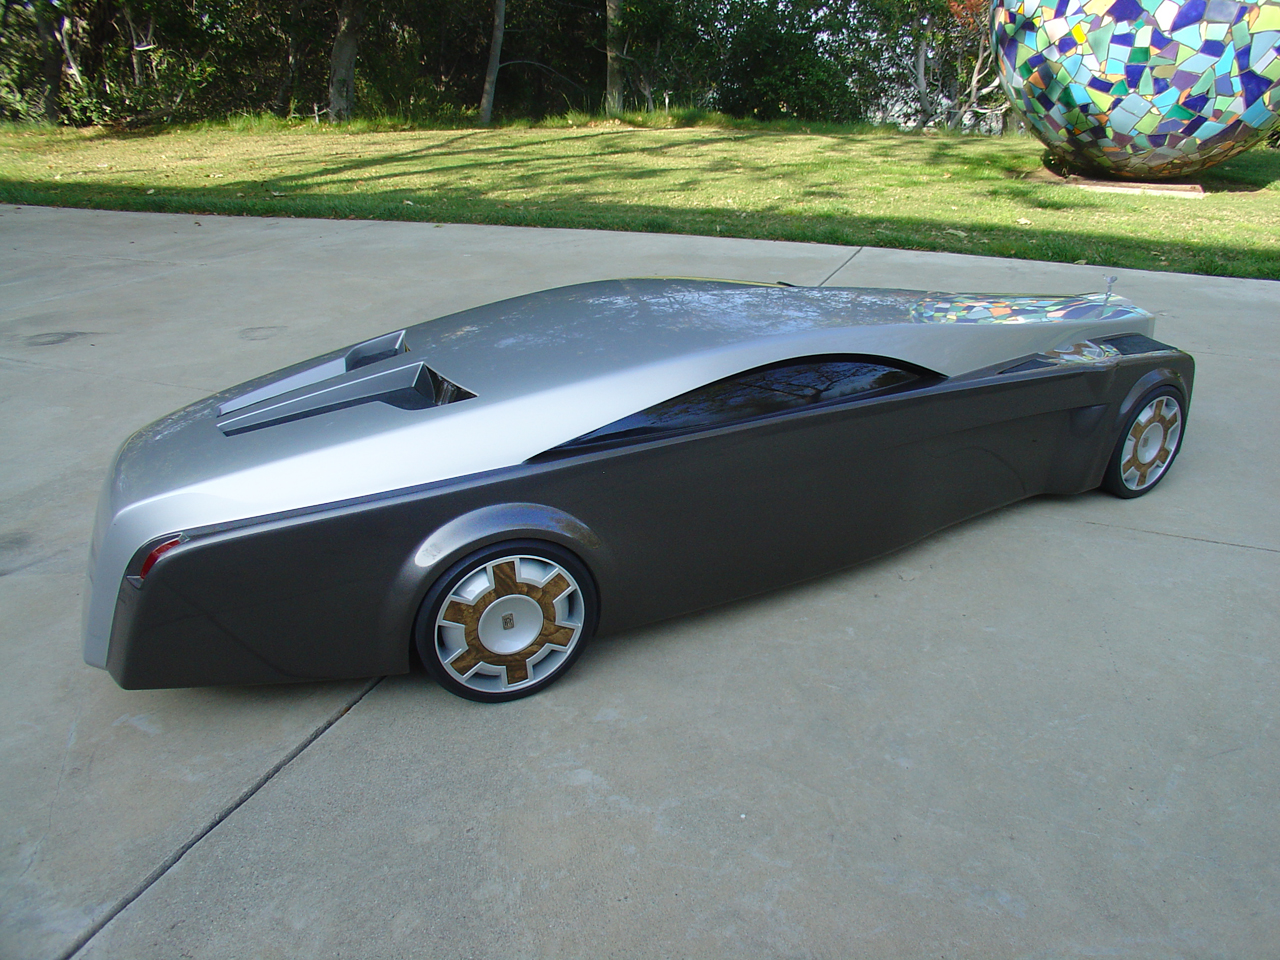 http://s1.cdn.autoevolution.com/images/news/gallery/rolls-royce-apparition-concept-is-eye-catching_4.jpg